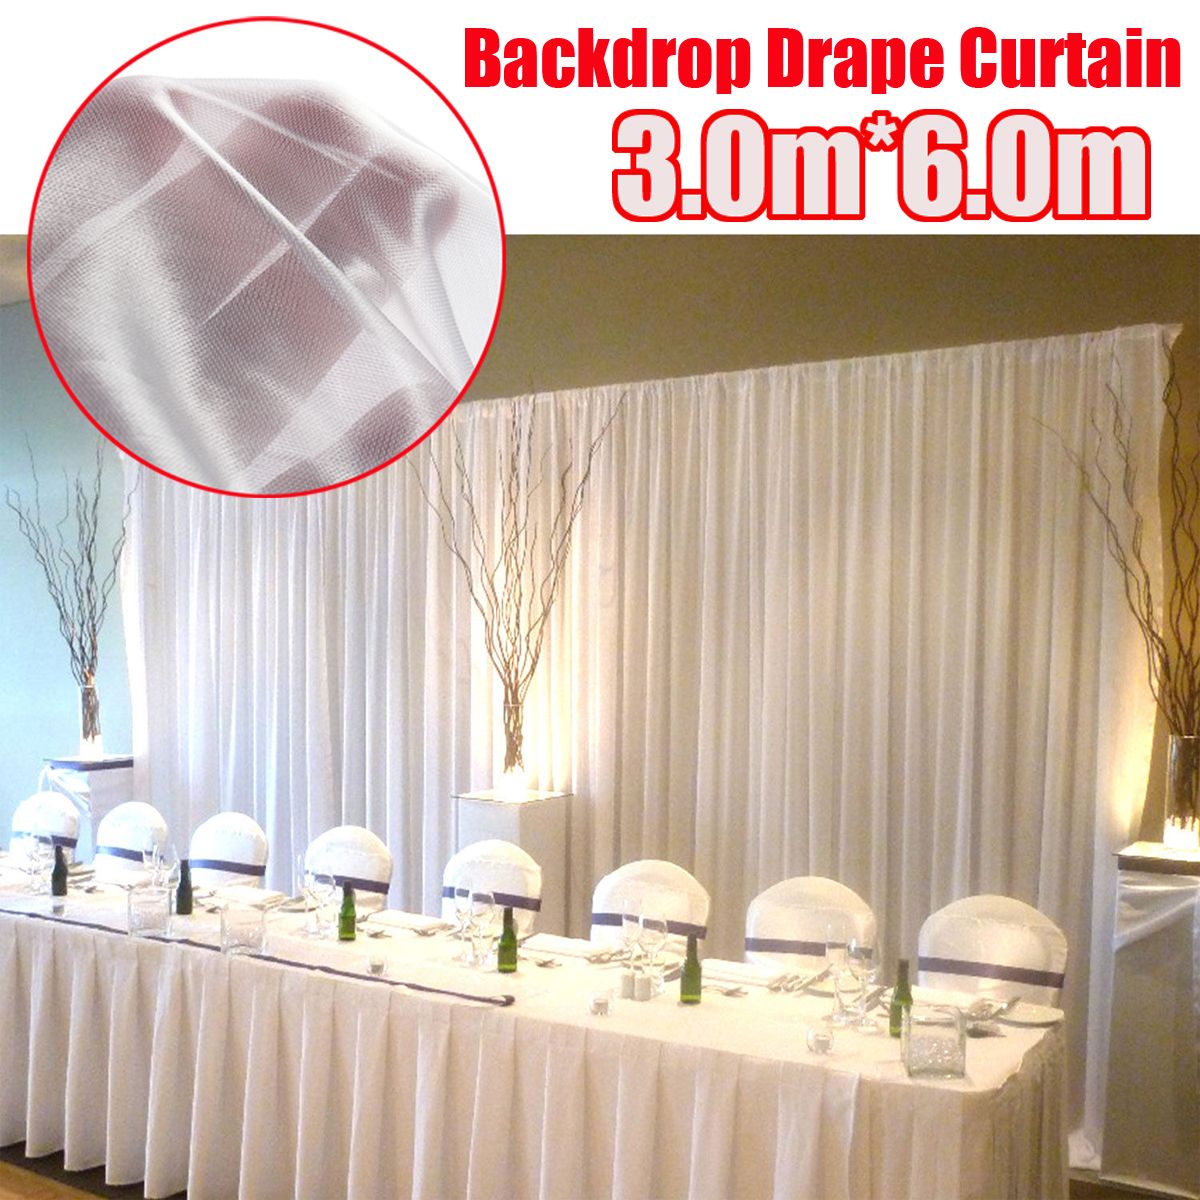 36M-White-Wedding-Party-Backdrop-Curtain-Drapes-Background-Decorations-Studio-Draping-1452746